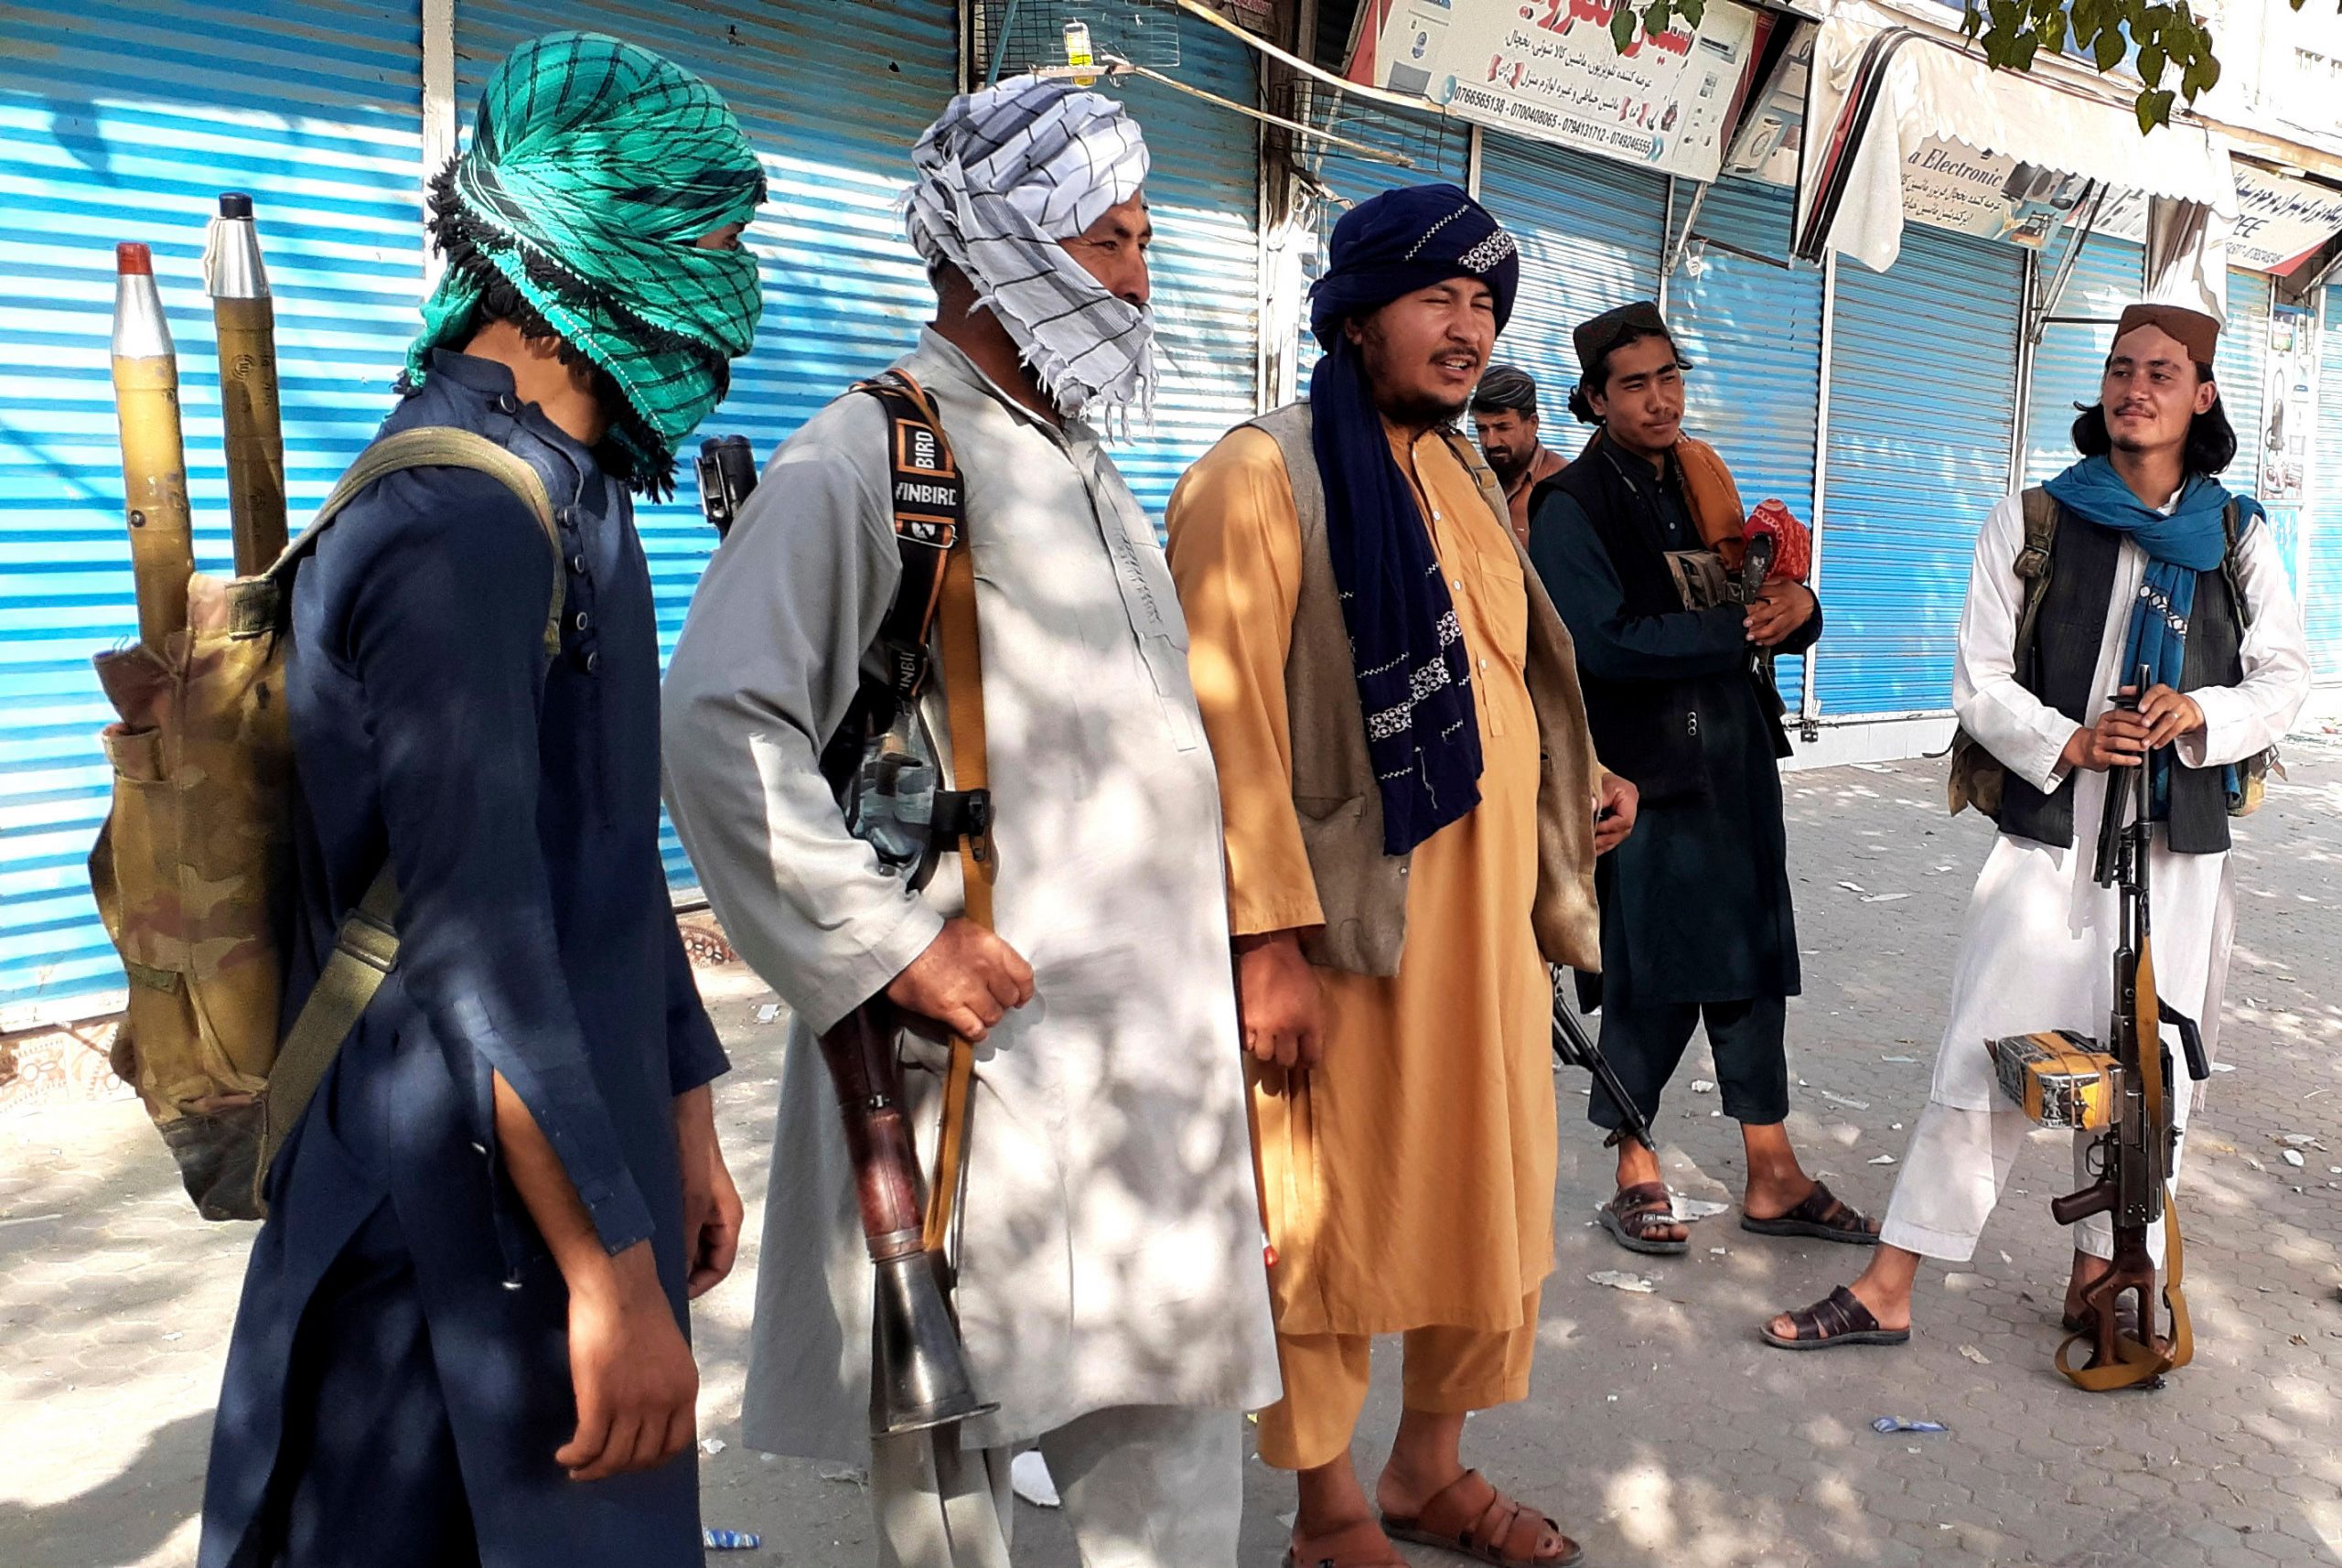 Their country, their struggle’: US ‘can’t do much’ as Afghan forces battle Taliban